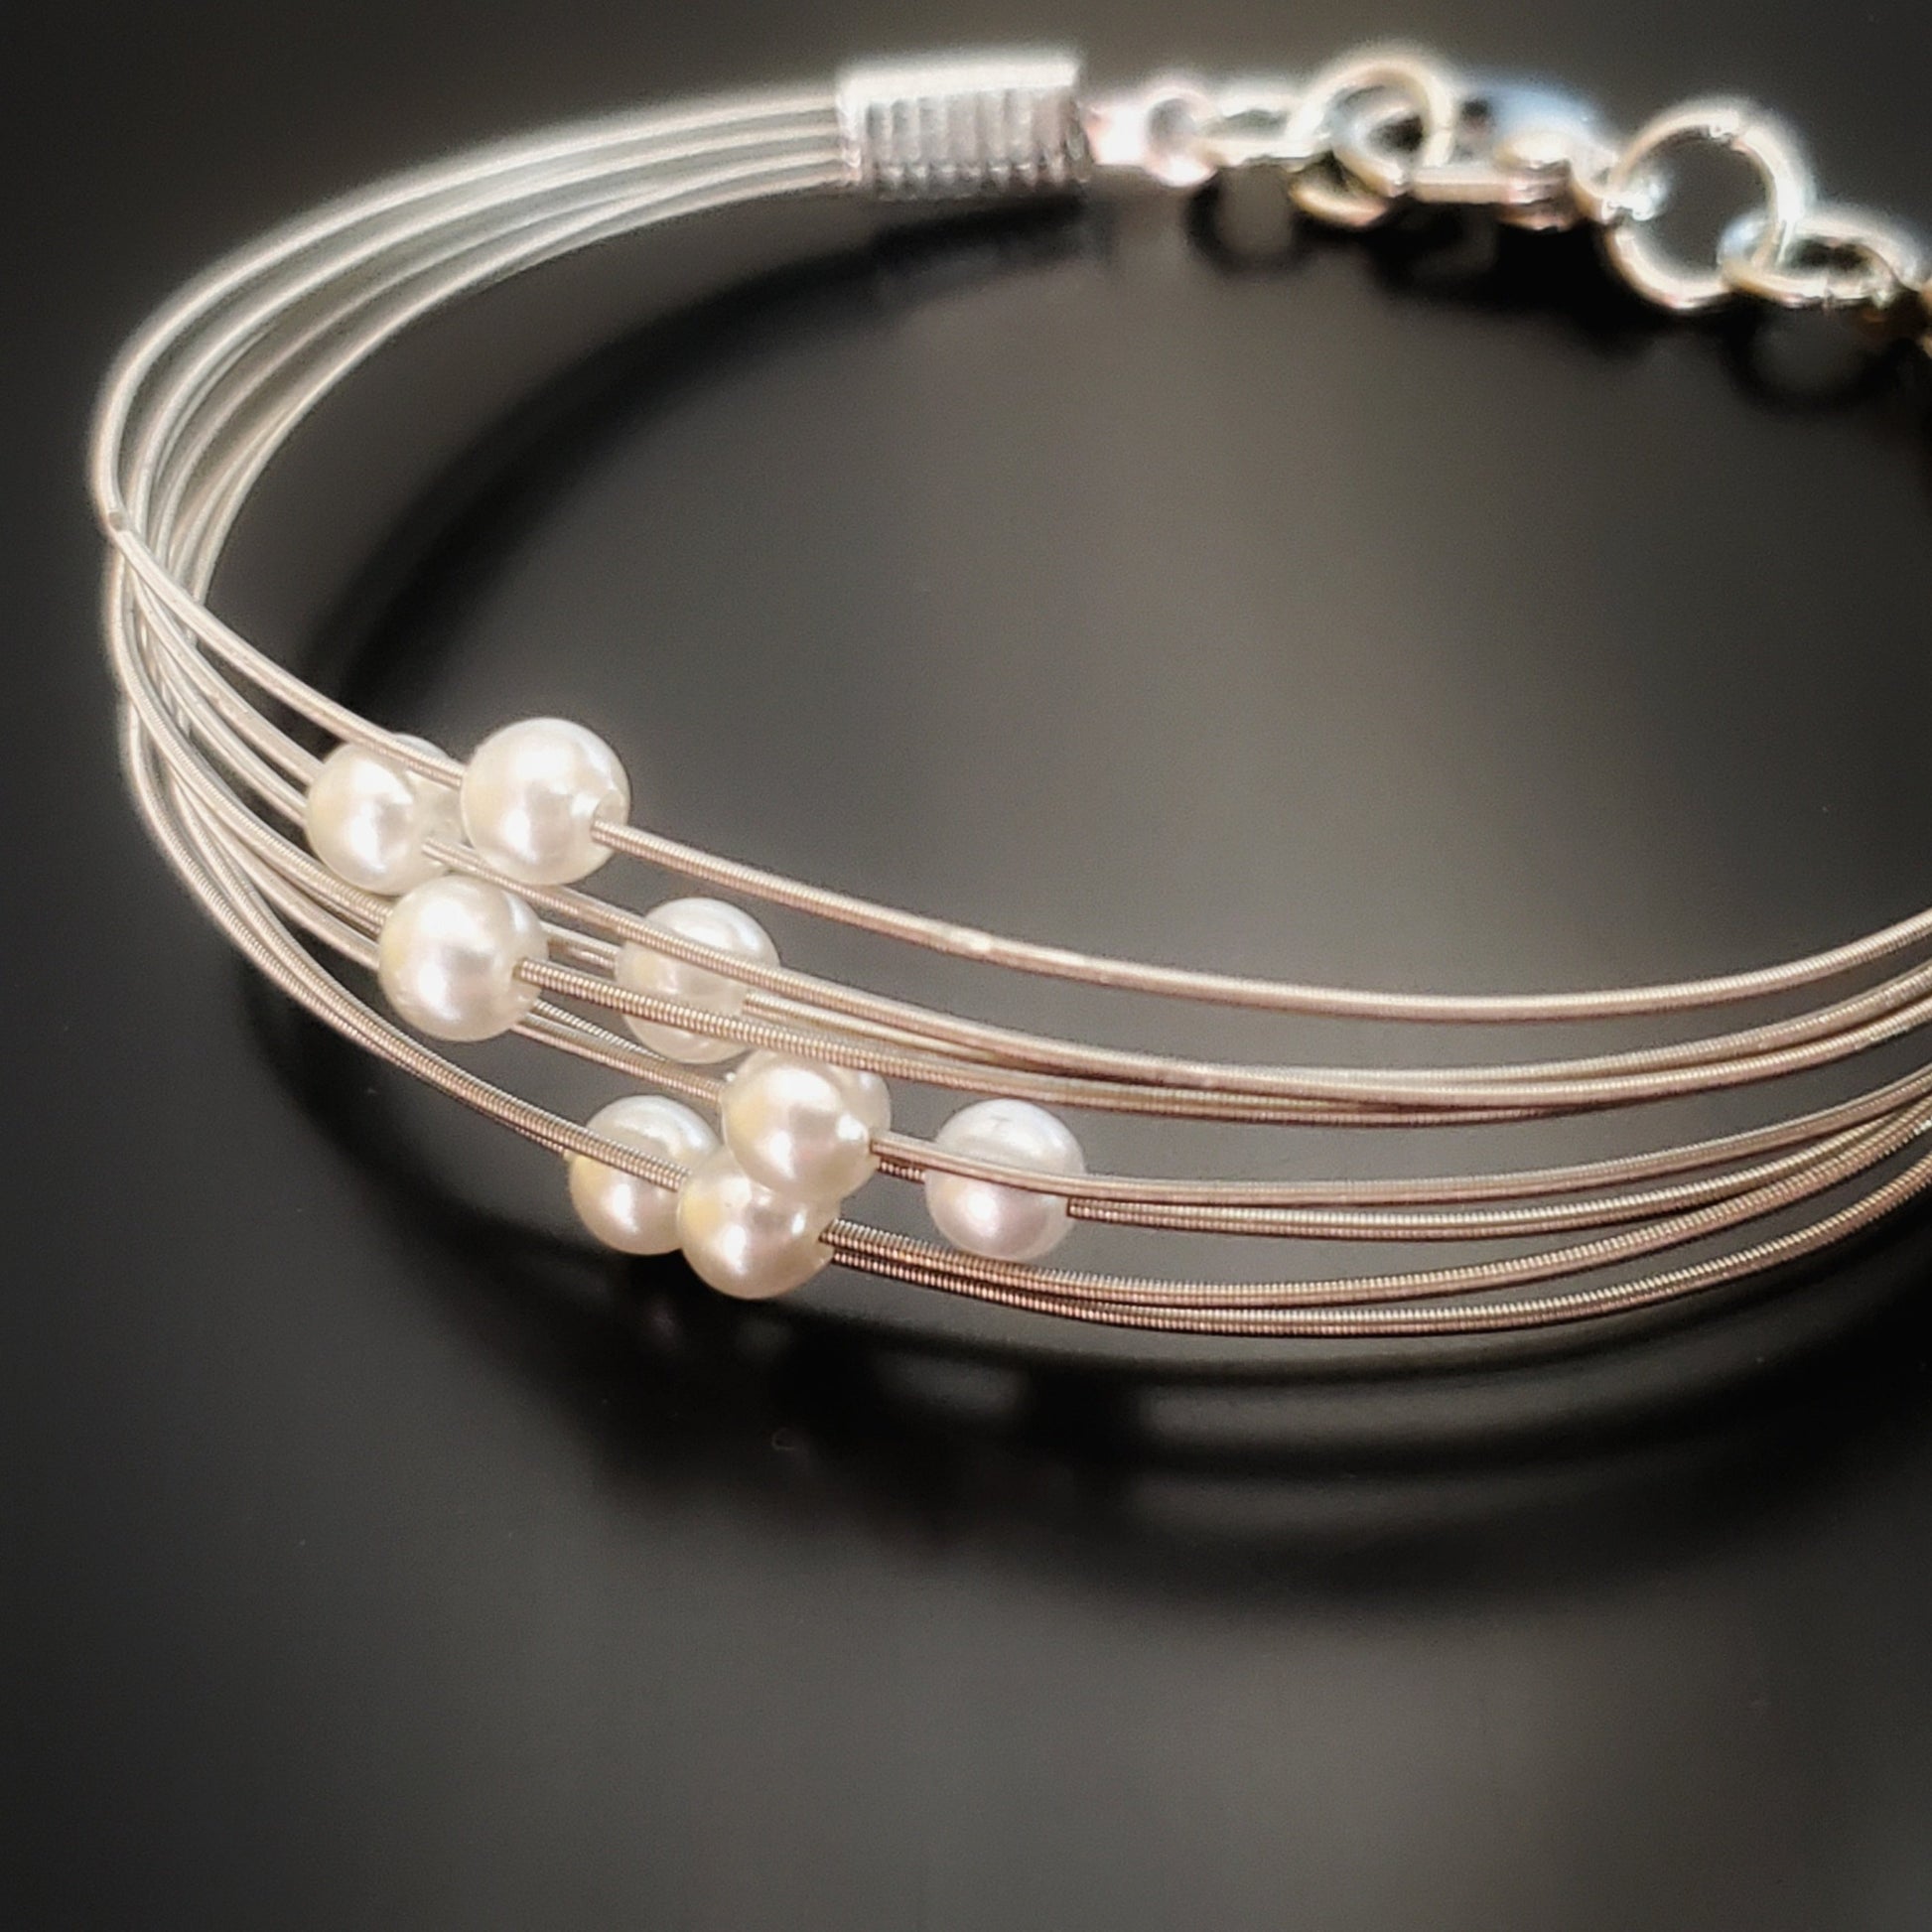 clasp style bracelet made from several strands of upcycled guitar strings on each one is a white glass bead